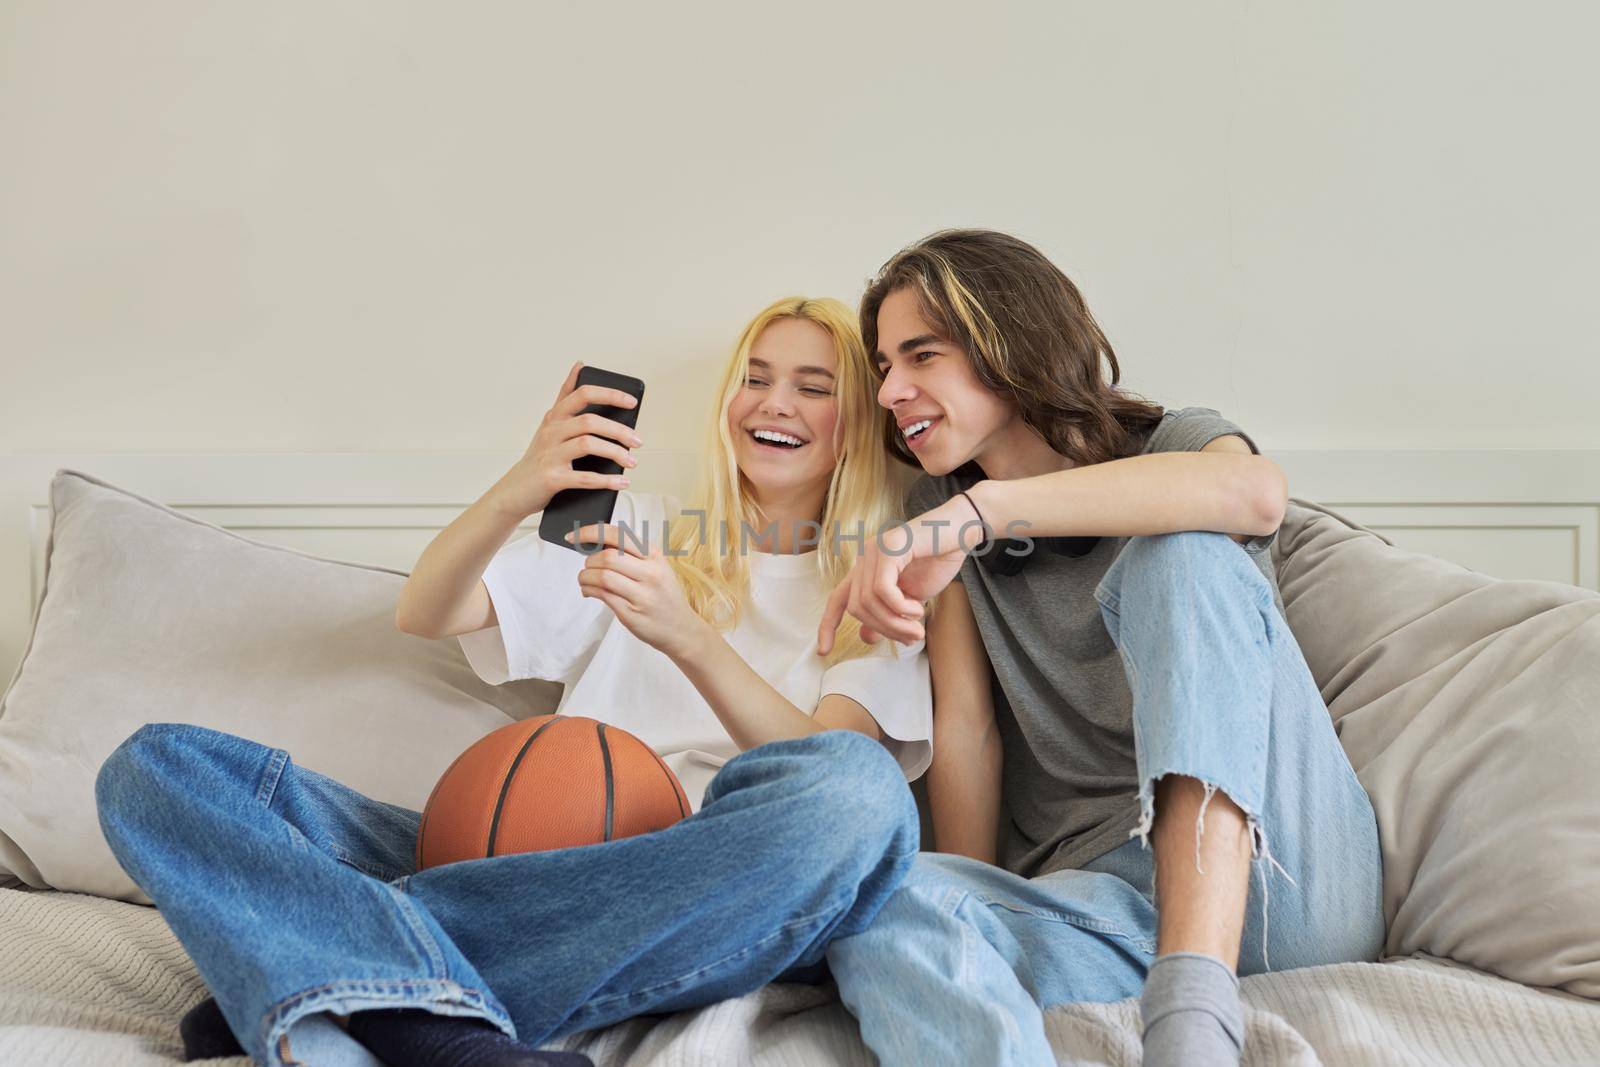 Happy laughing hipster teenagers male and female having fun using smartphone together. Couple takes photos chat online using video call. Lifestyle, technology, friendship, communication of adolescents